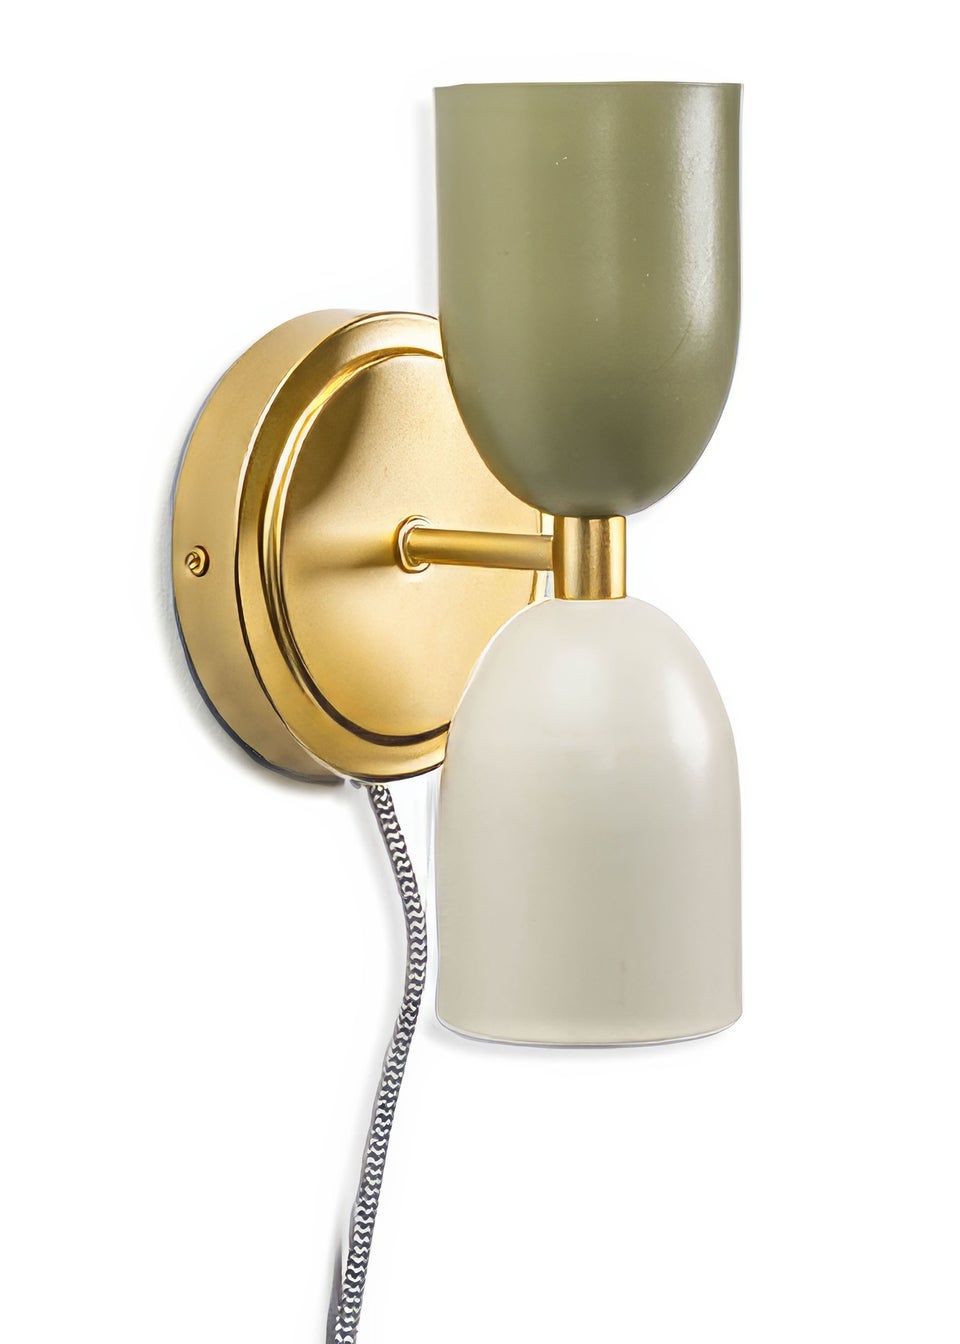 ValueLights Tate Up Down Plug In Gold Wall Light (23cm x 12cm x 12cm)